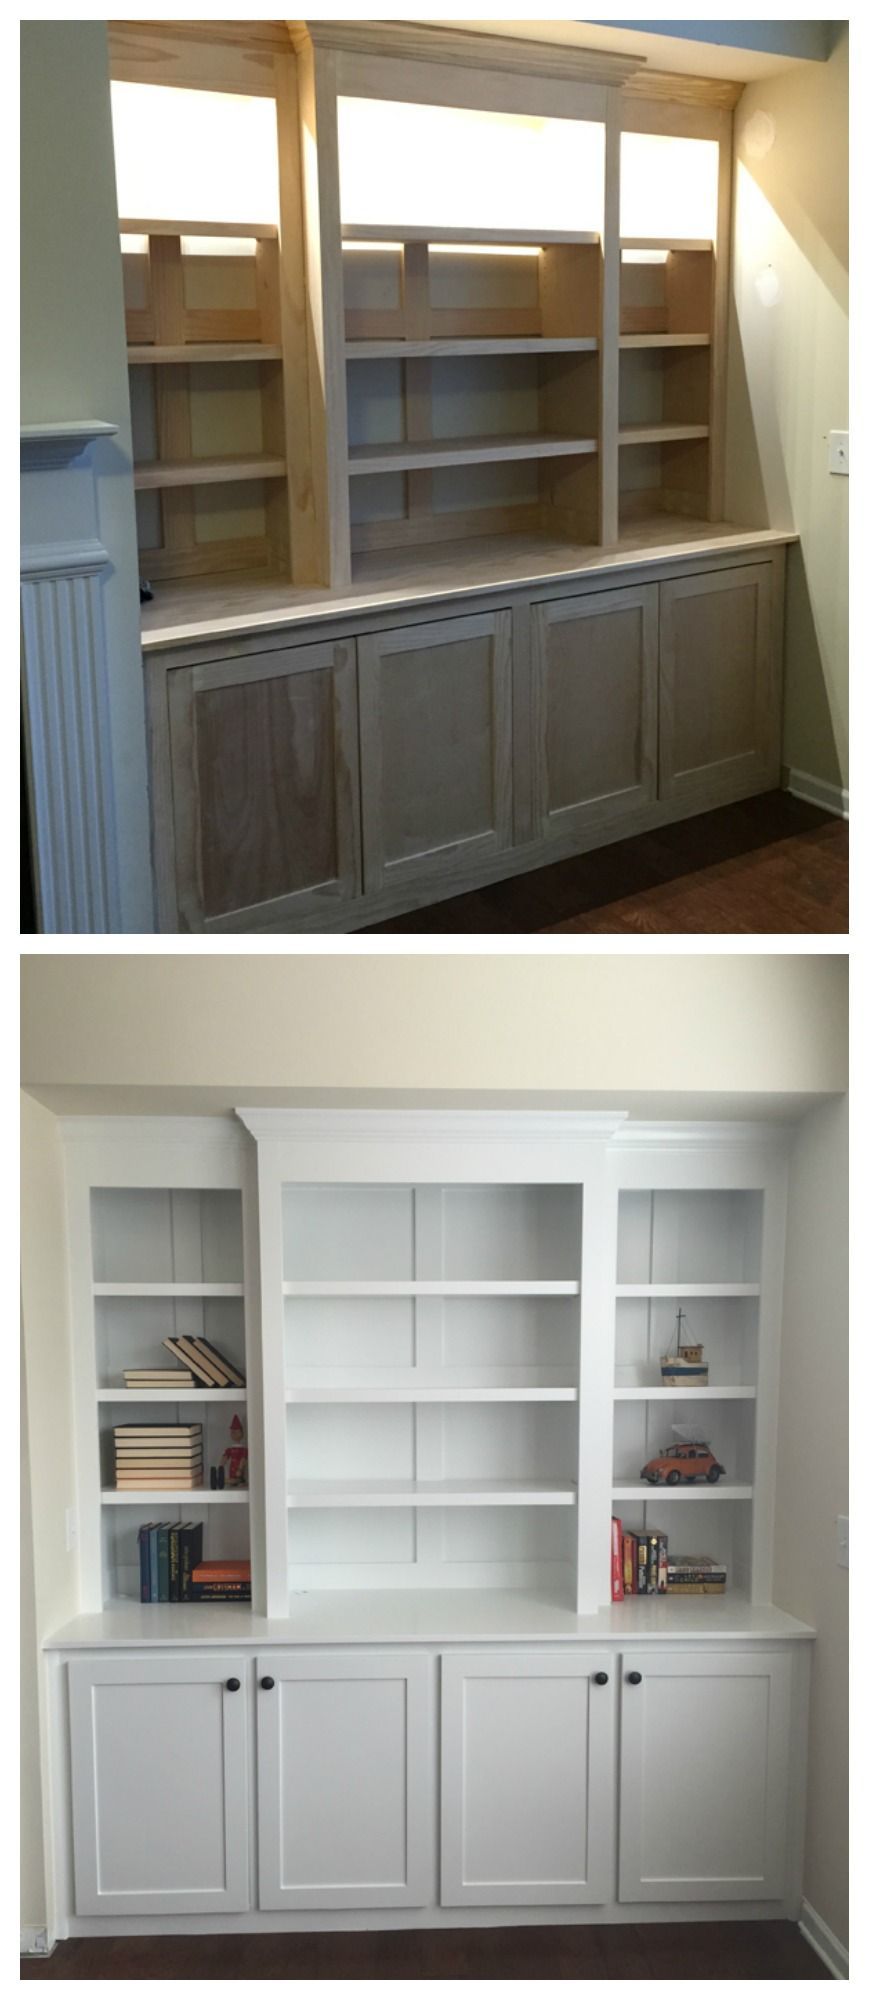 Amazing diy built-in buffet shelving from plywood and pine.